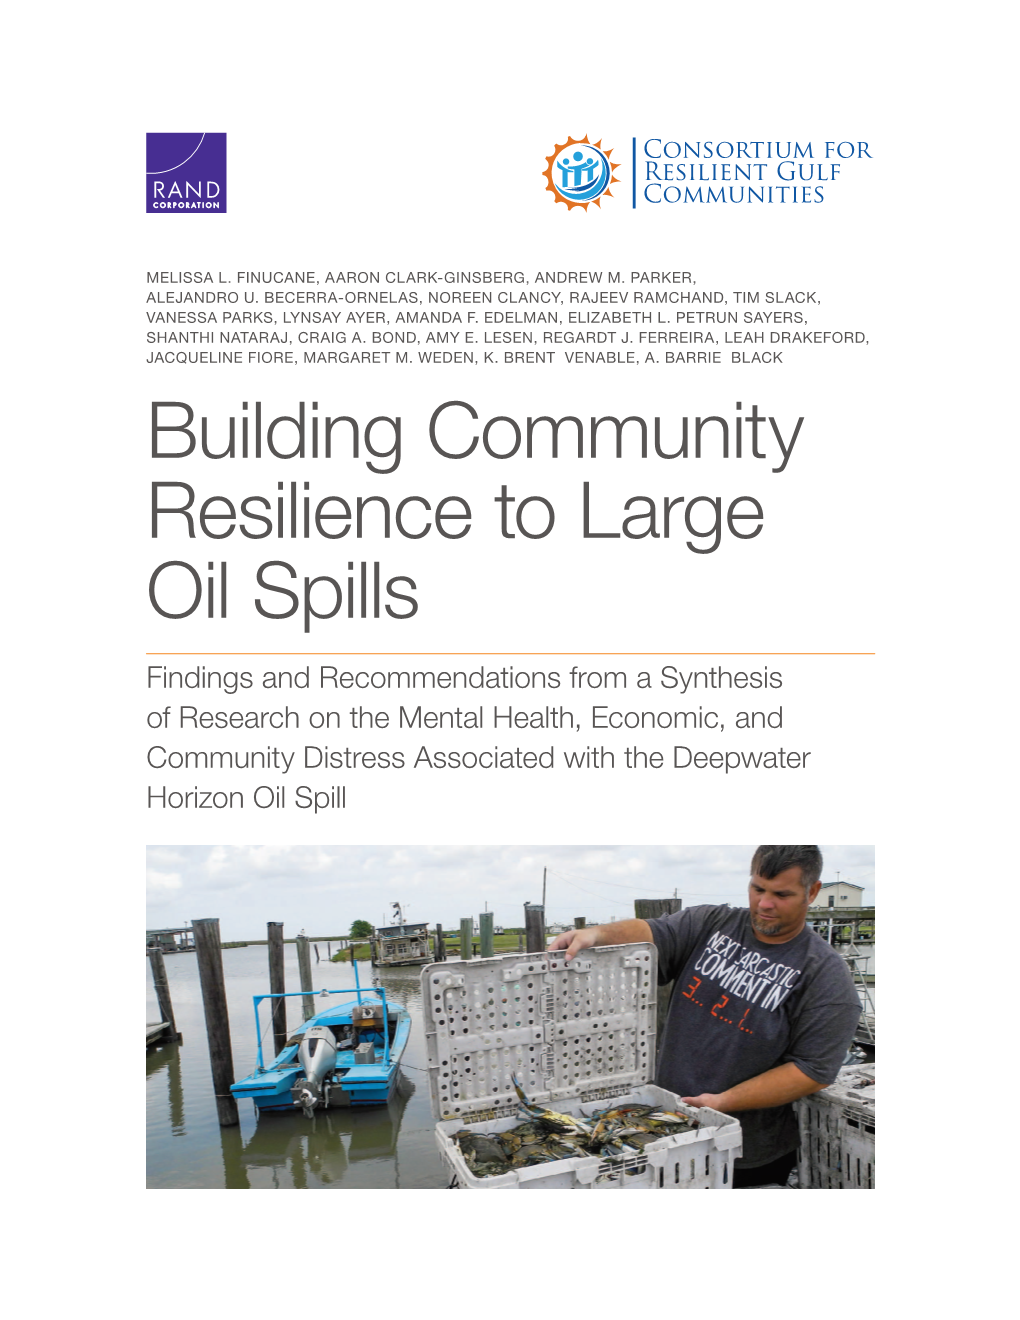 Building Community Resilience to Large Oil Spills